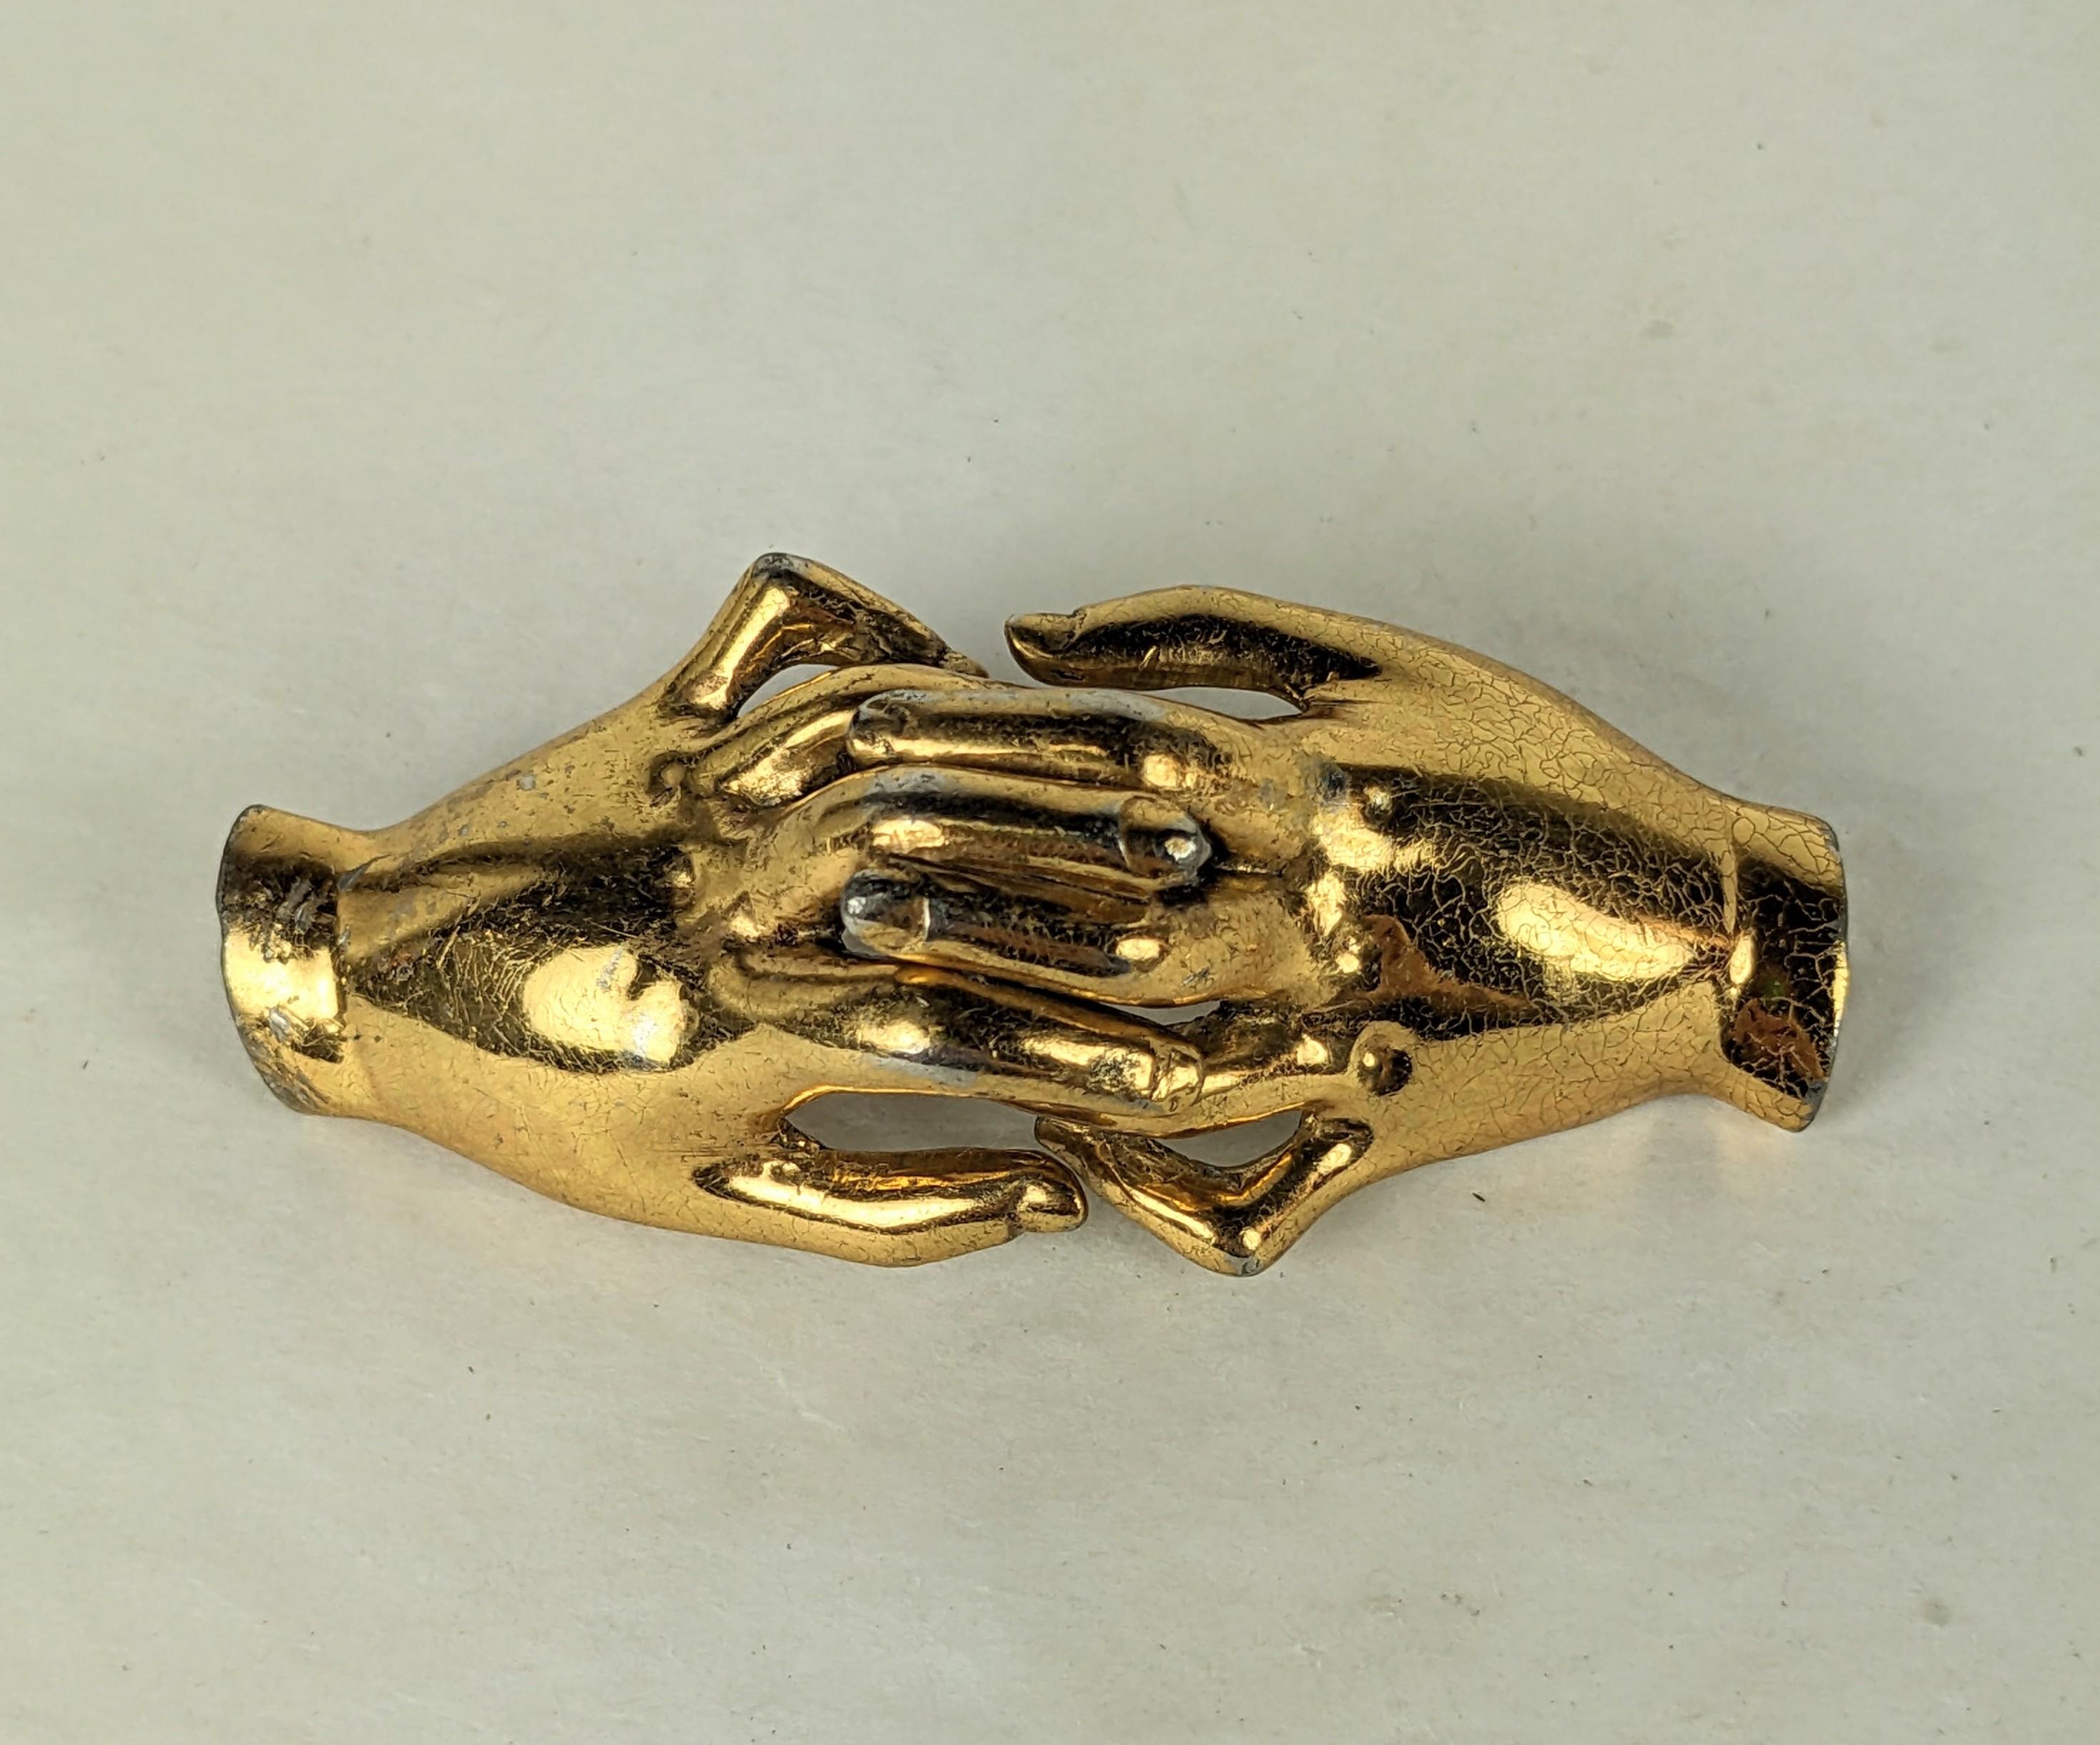 Charming Silson Clutched Hands Retro Corsage Brooch from the 1940's. A pair of realistically modeled gilt hands is designed to be pinned over a corsage or bouquet or fresh flowers for a lapel. Signed. 2.75